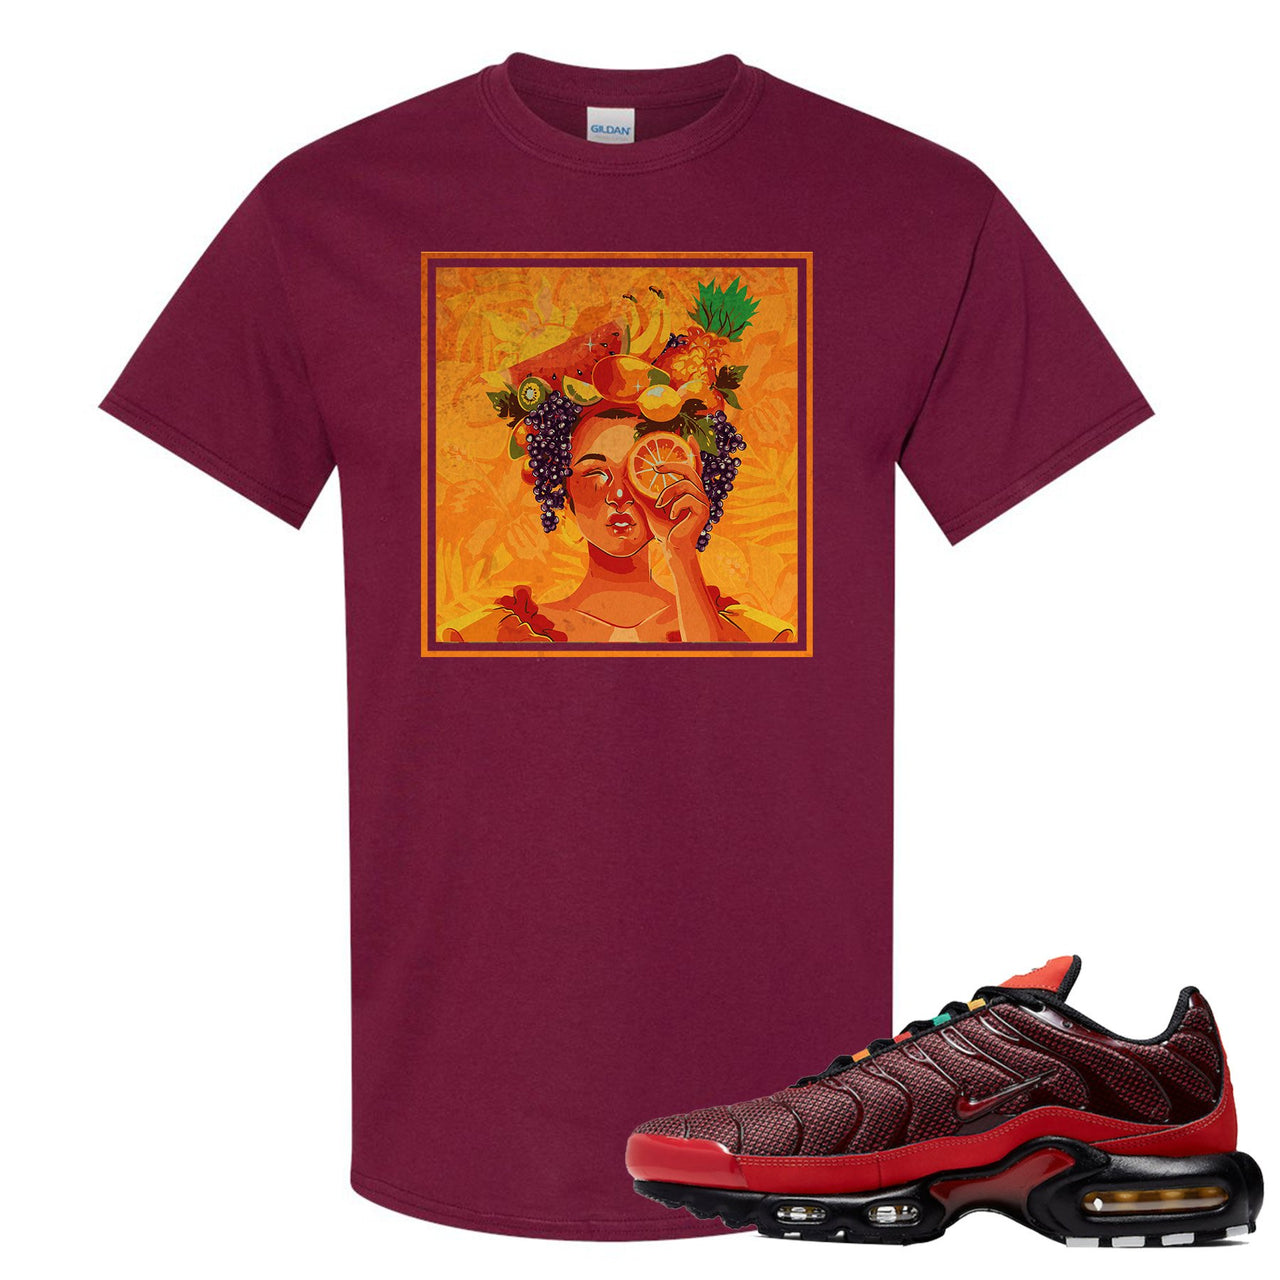 printed on the front of the nike air max plus sneaker matching maroon t-shirt is the lady fruit logo